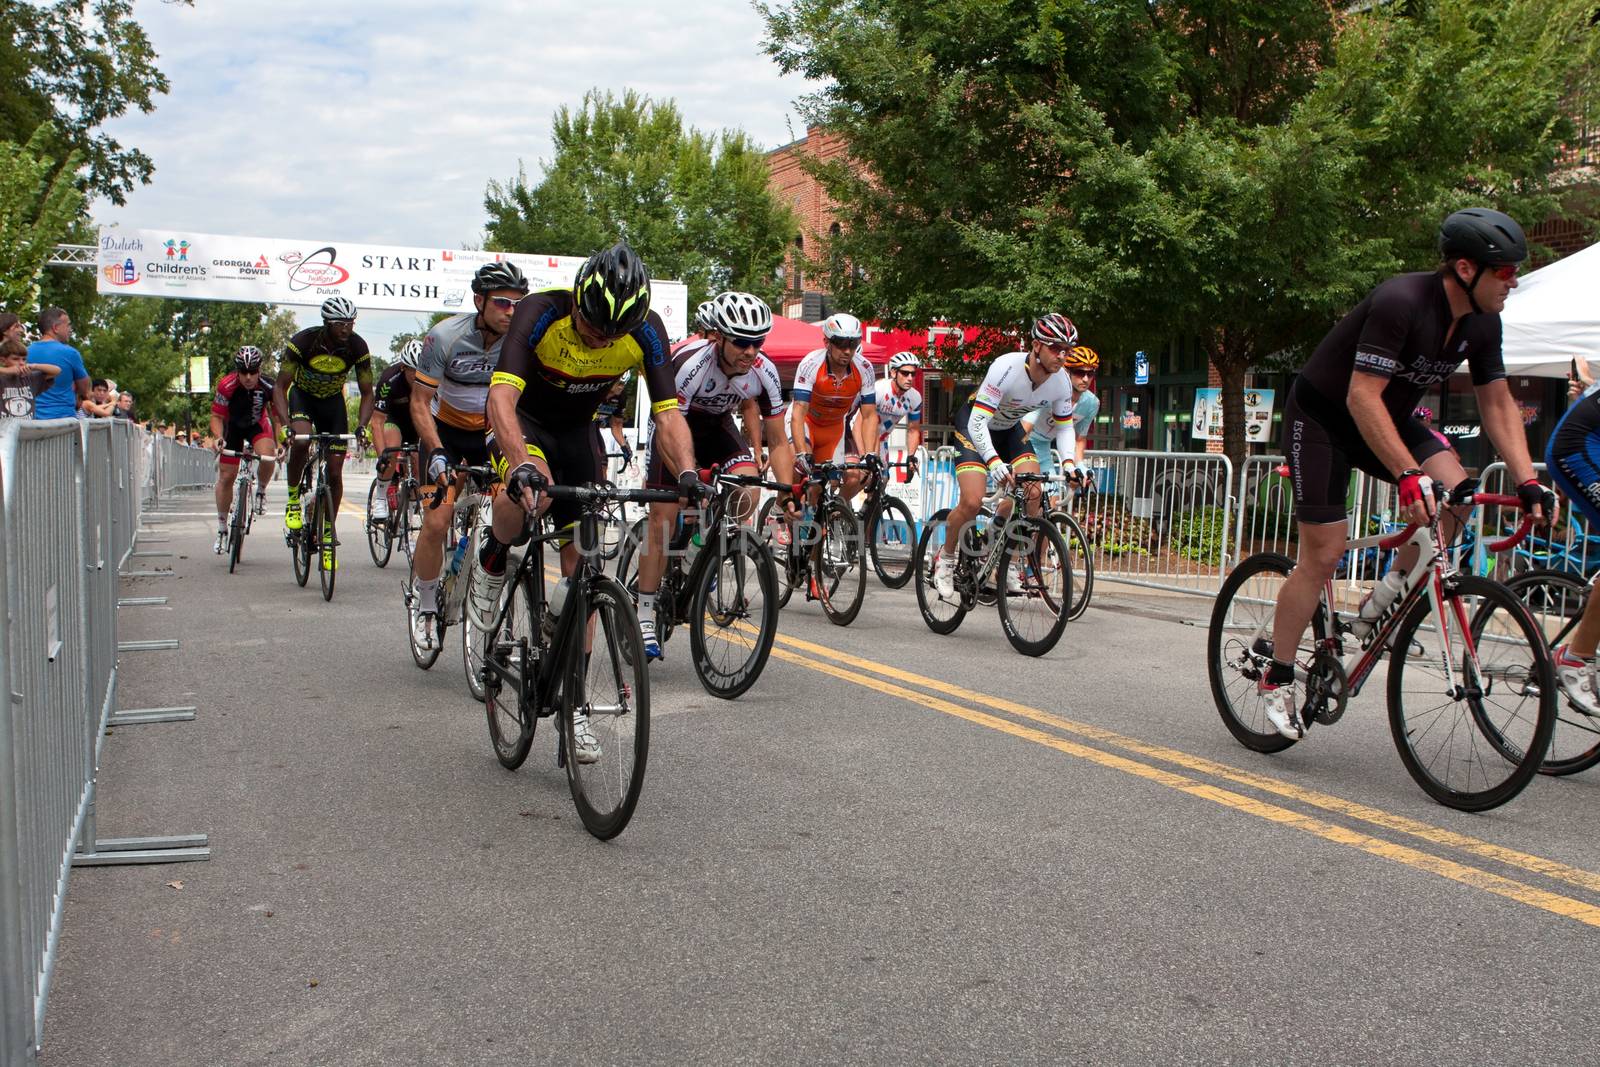 Duluth, GA, USA - August 2, 2014:  A group of cyclists sprint from the starting line as they compete in the Georgia Cup Criterium event.